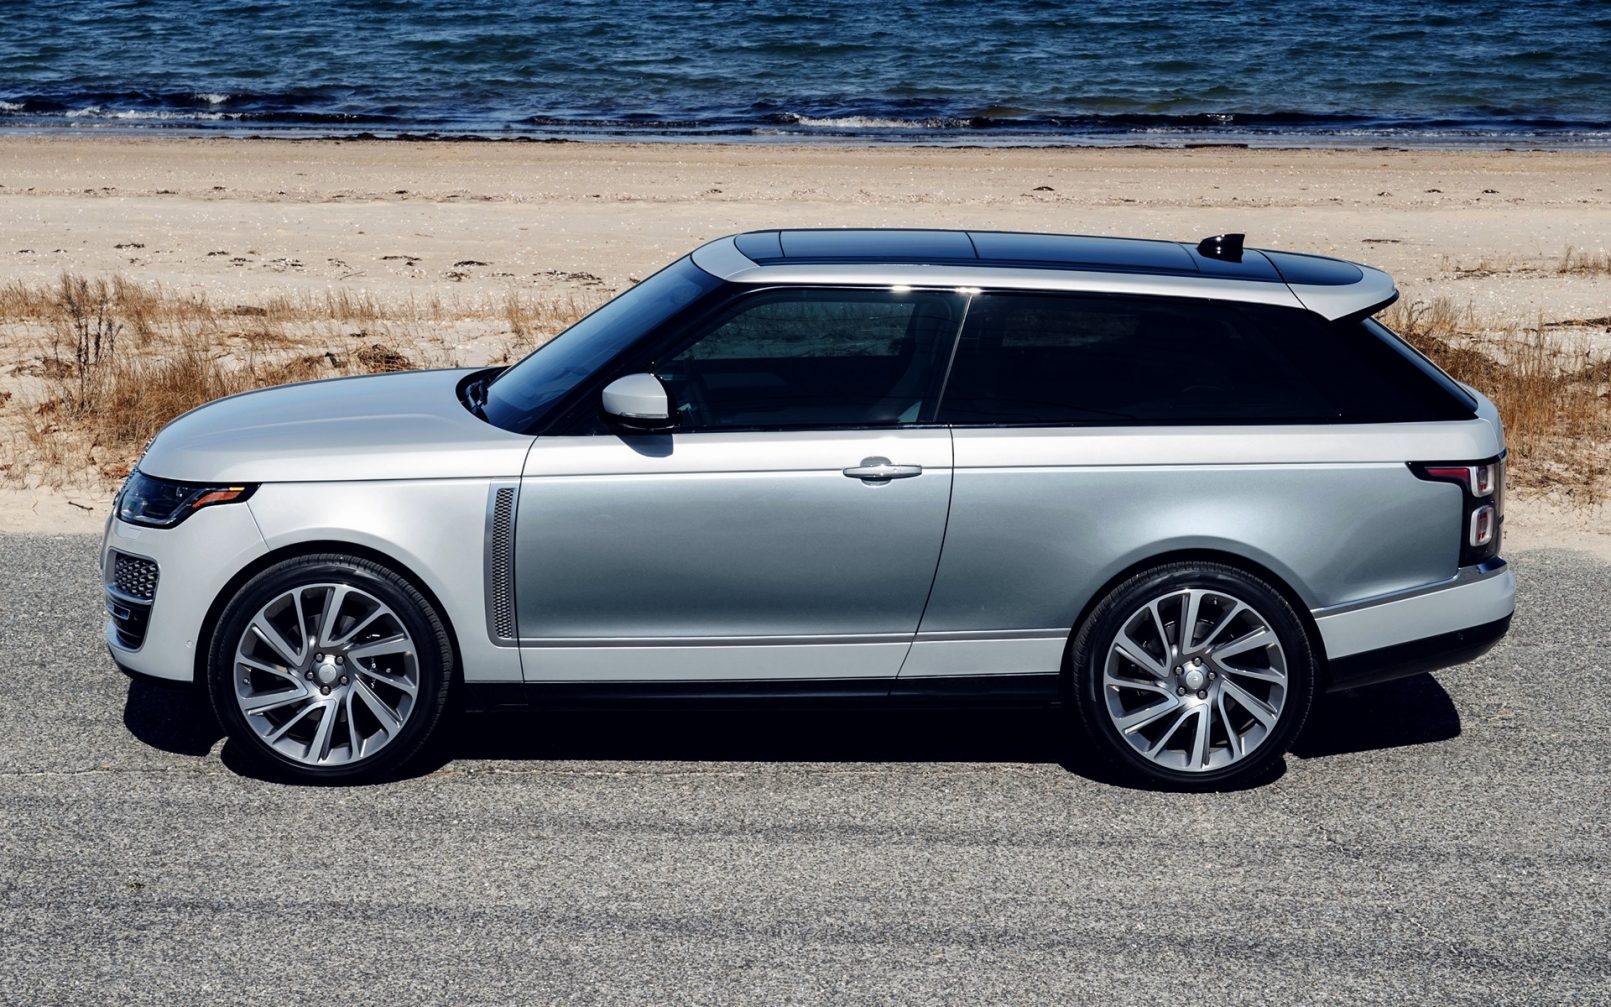 New 2019 Range Rover Sv Coupe Side Hd Wallpapers - Range Rover Sv Coupe , HD Wallpaper & Backgrounds